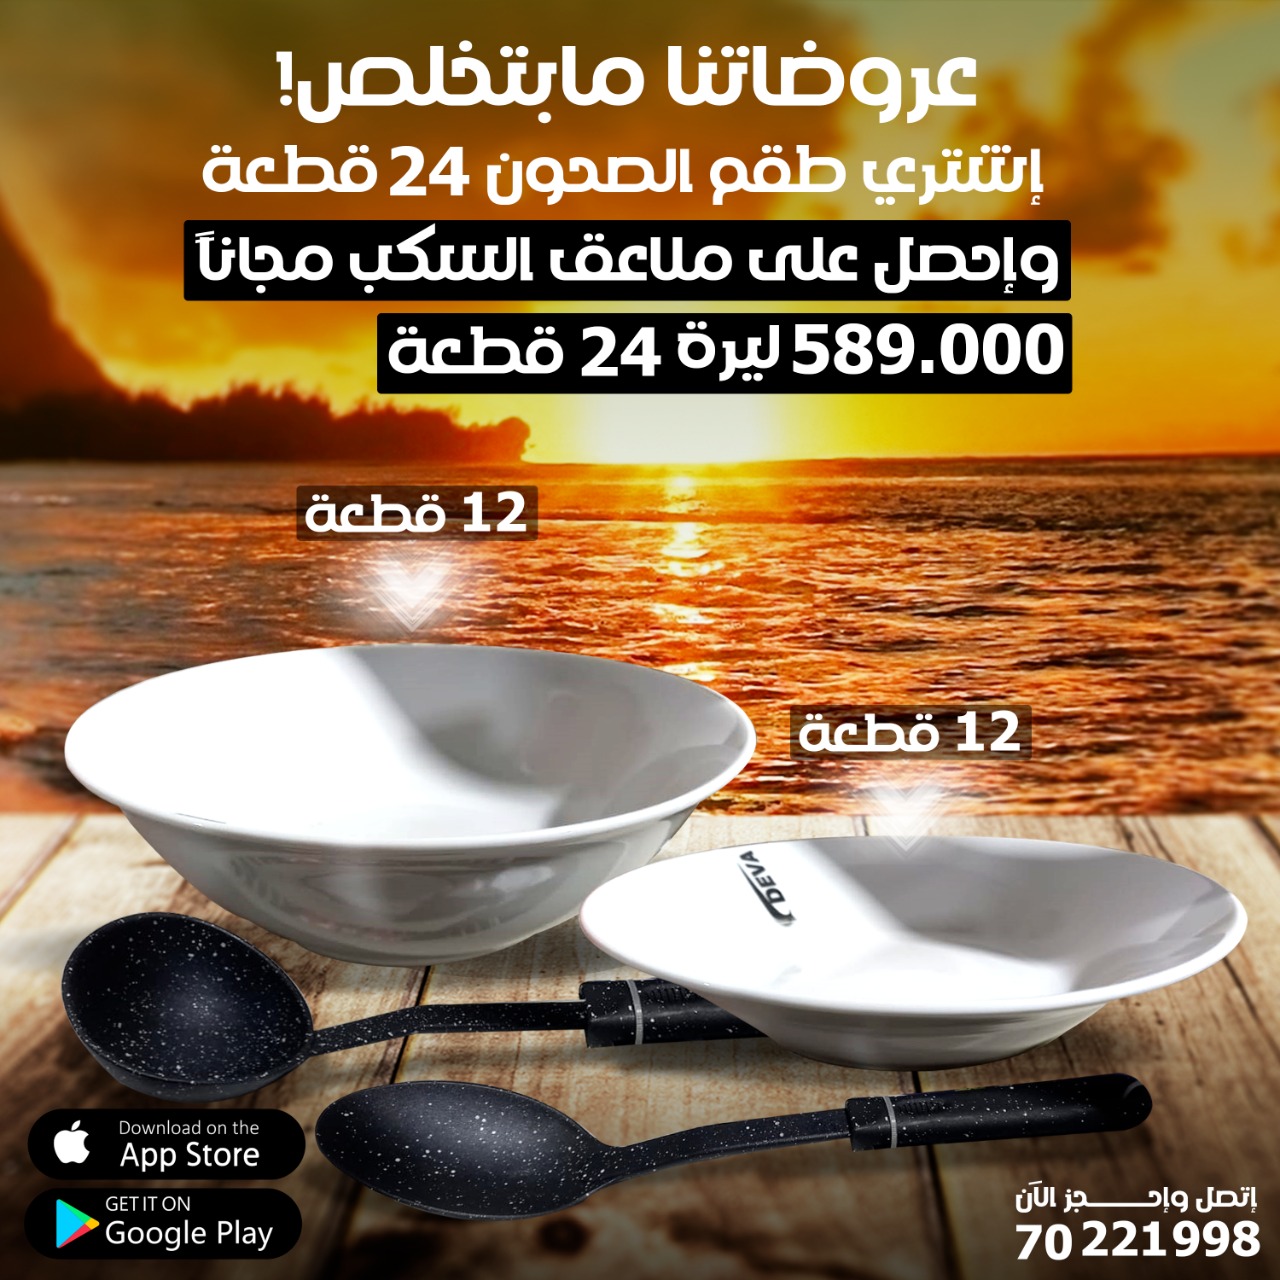 special+offer+12pcs+plate+%26+12pcs+bowl+with+2+big+spoons+for+pouring